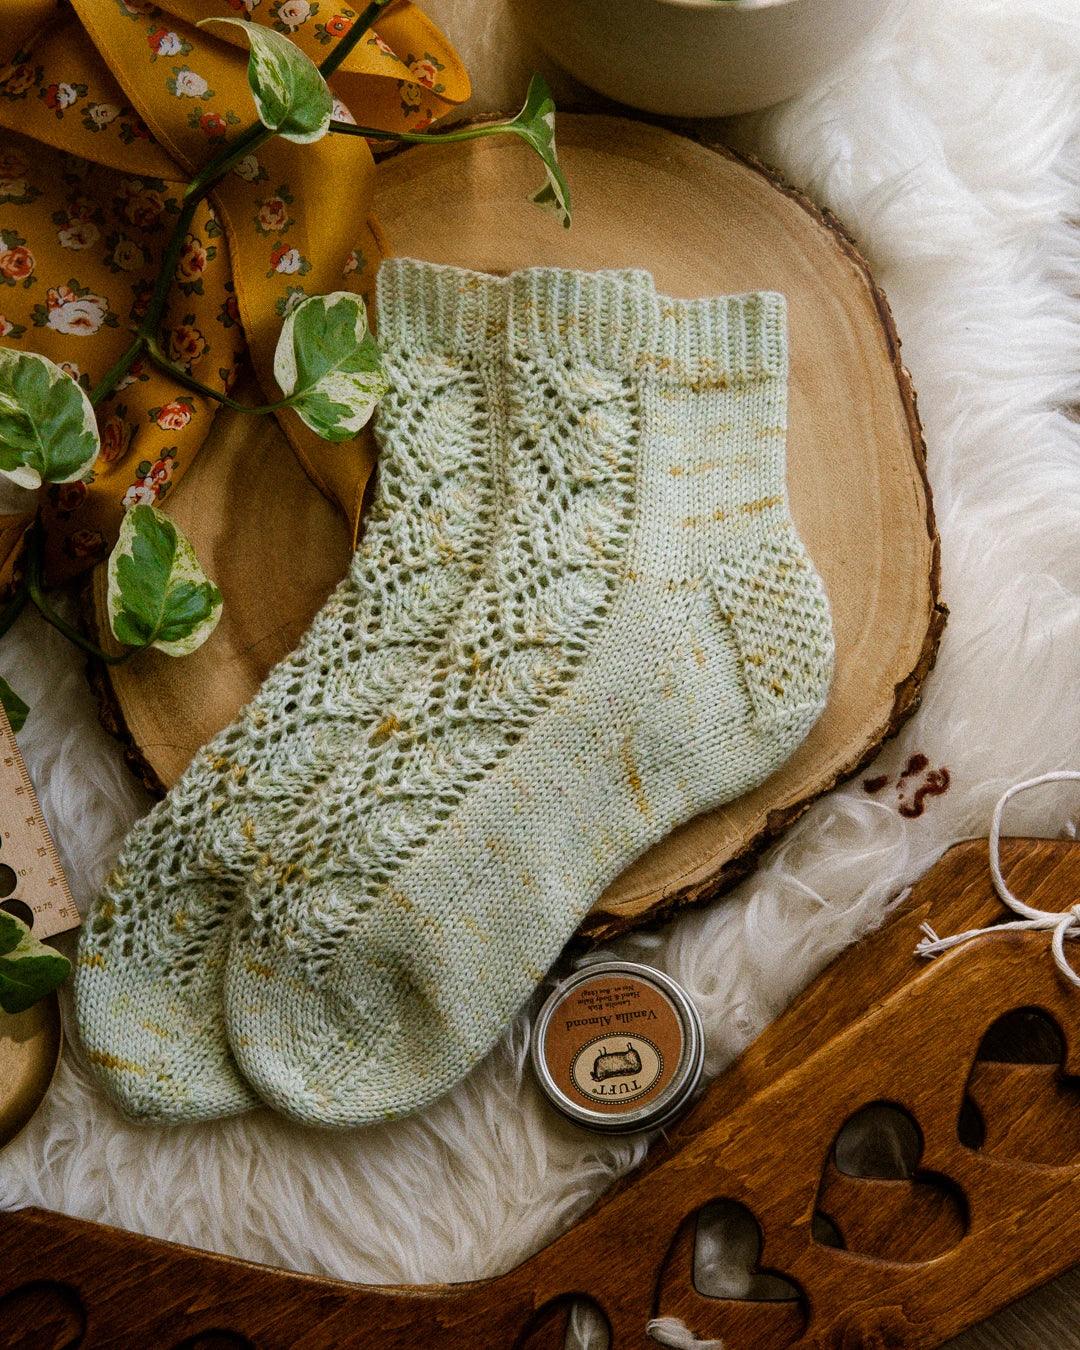 Oolong Socks in a flat lay. This photo features the lace sock knitting pattern with gentle speckle and no ruffle.